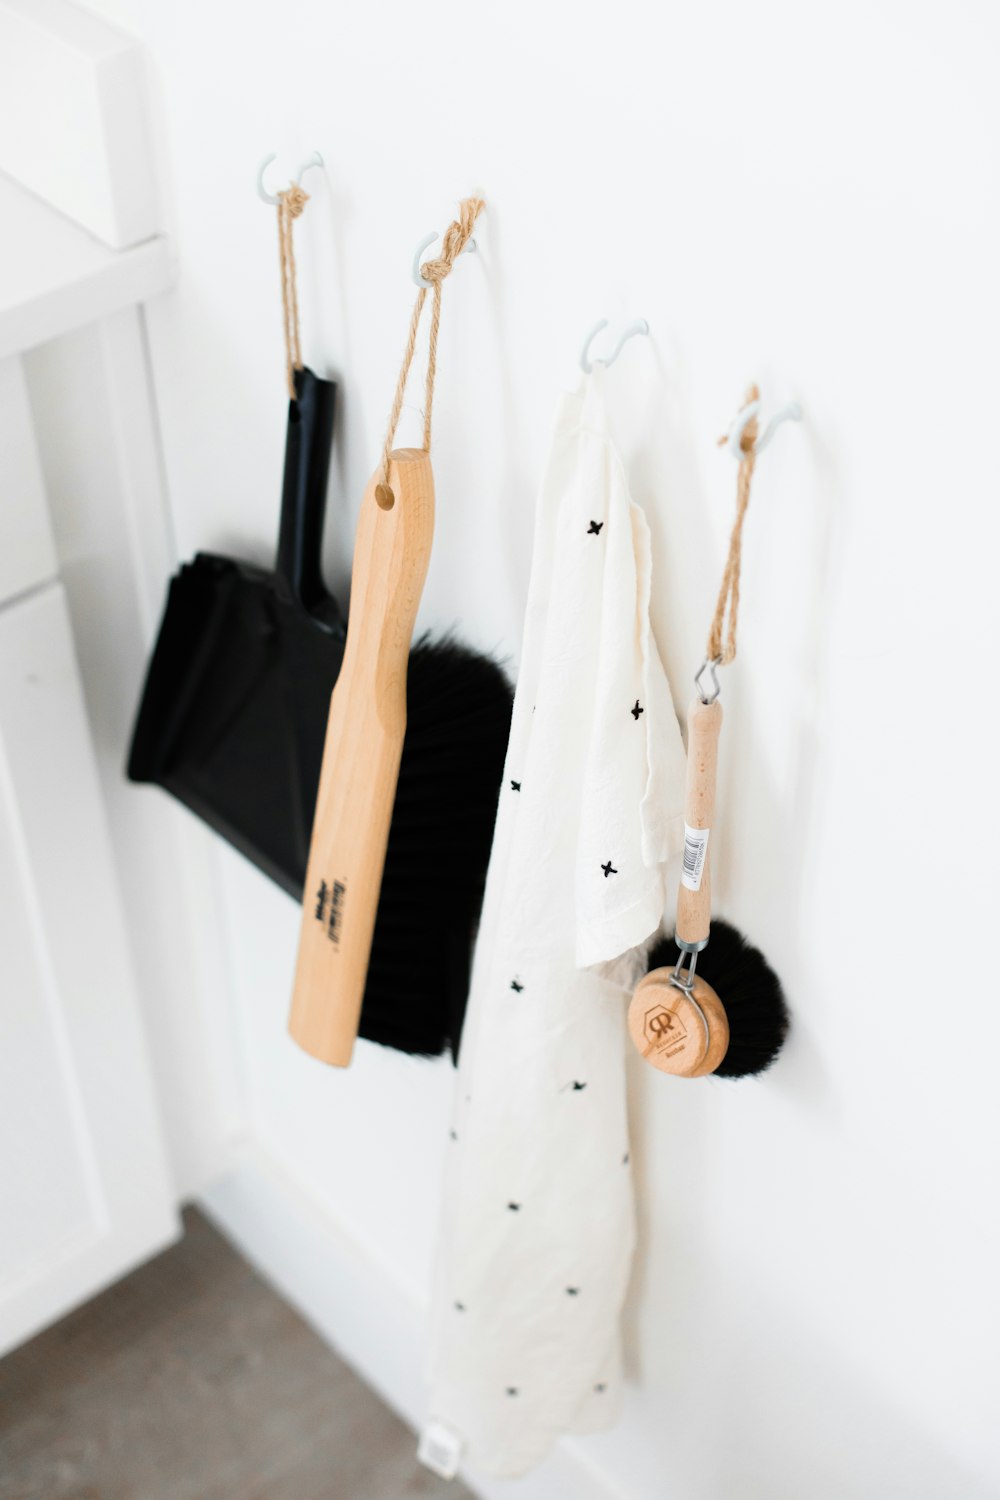 Three black and brown bathroom cleaning tools photo – Free Cleaning Image  on Unsplash